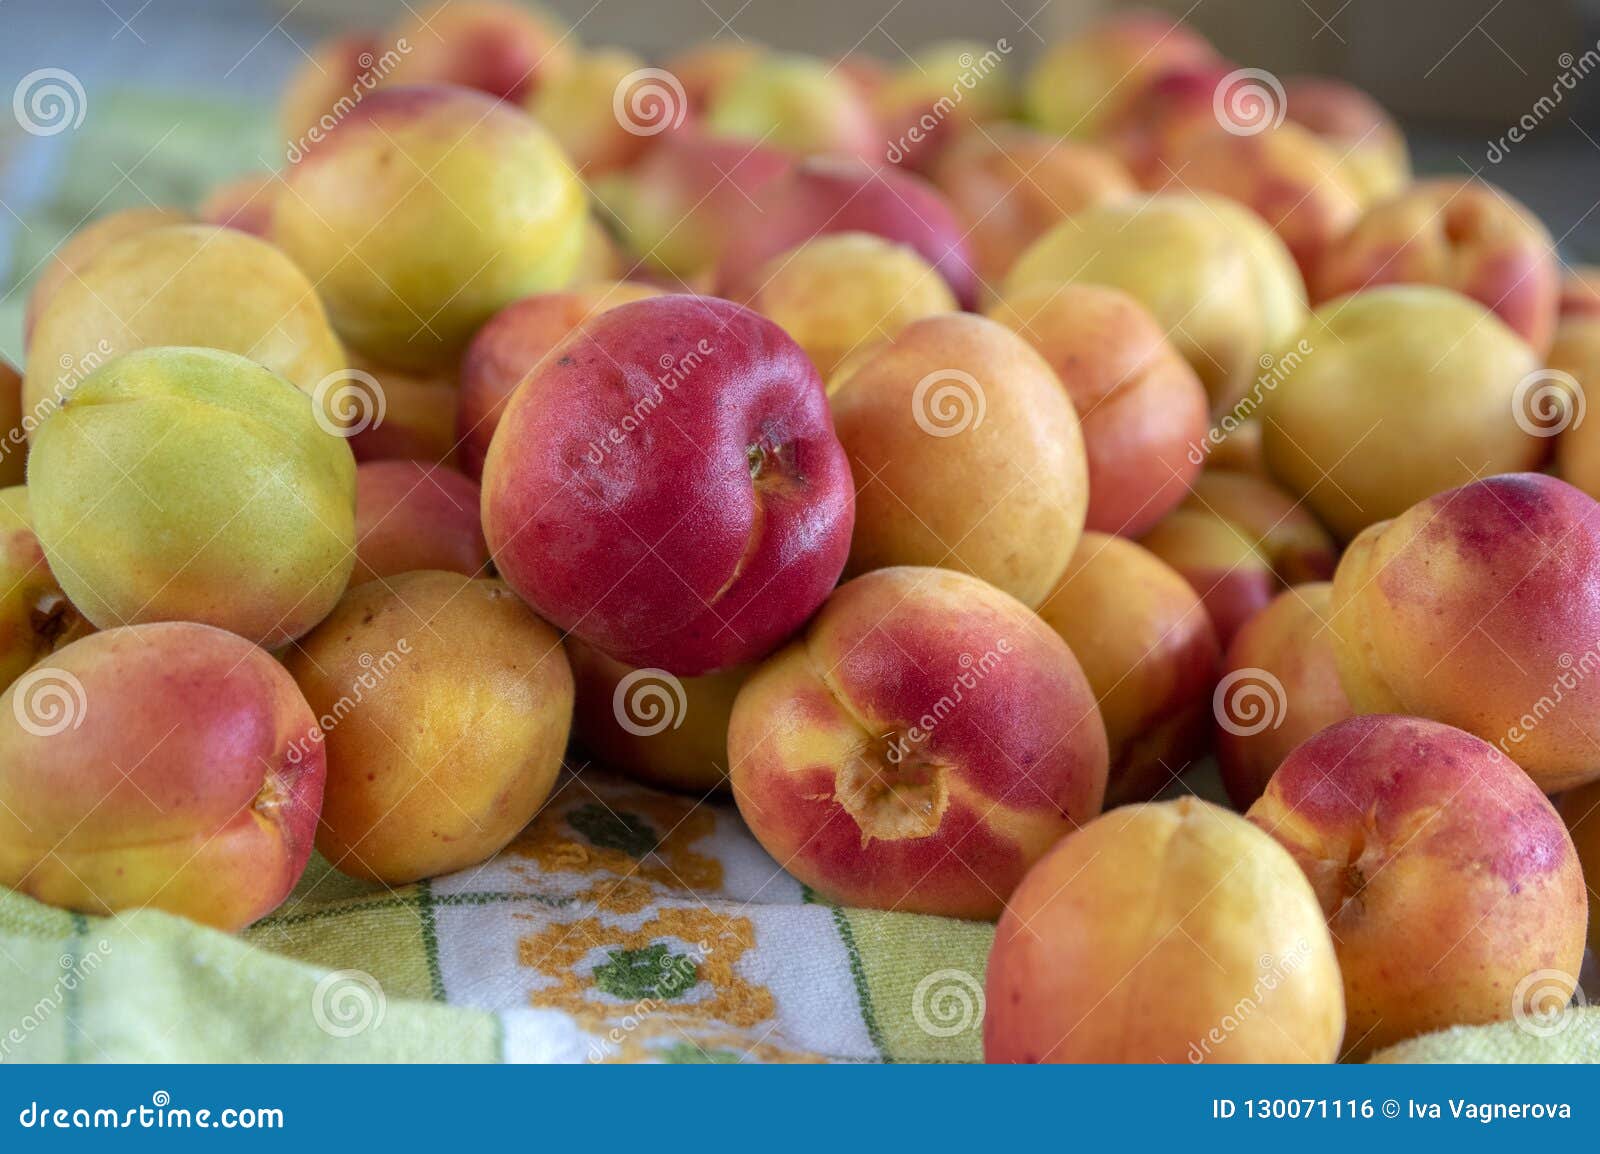 Fresh Ripened Apricots On Kitchen Towel In Daylight Edible Tasty